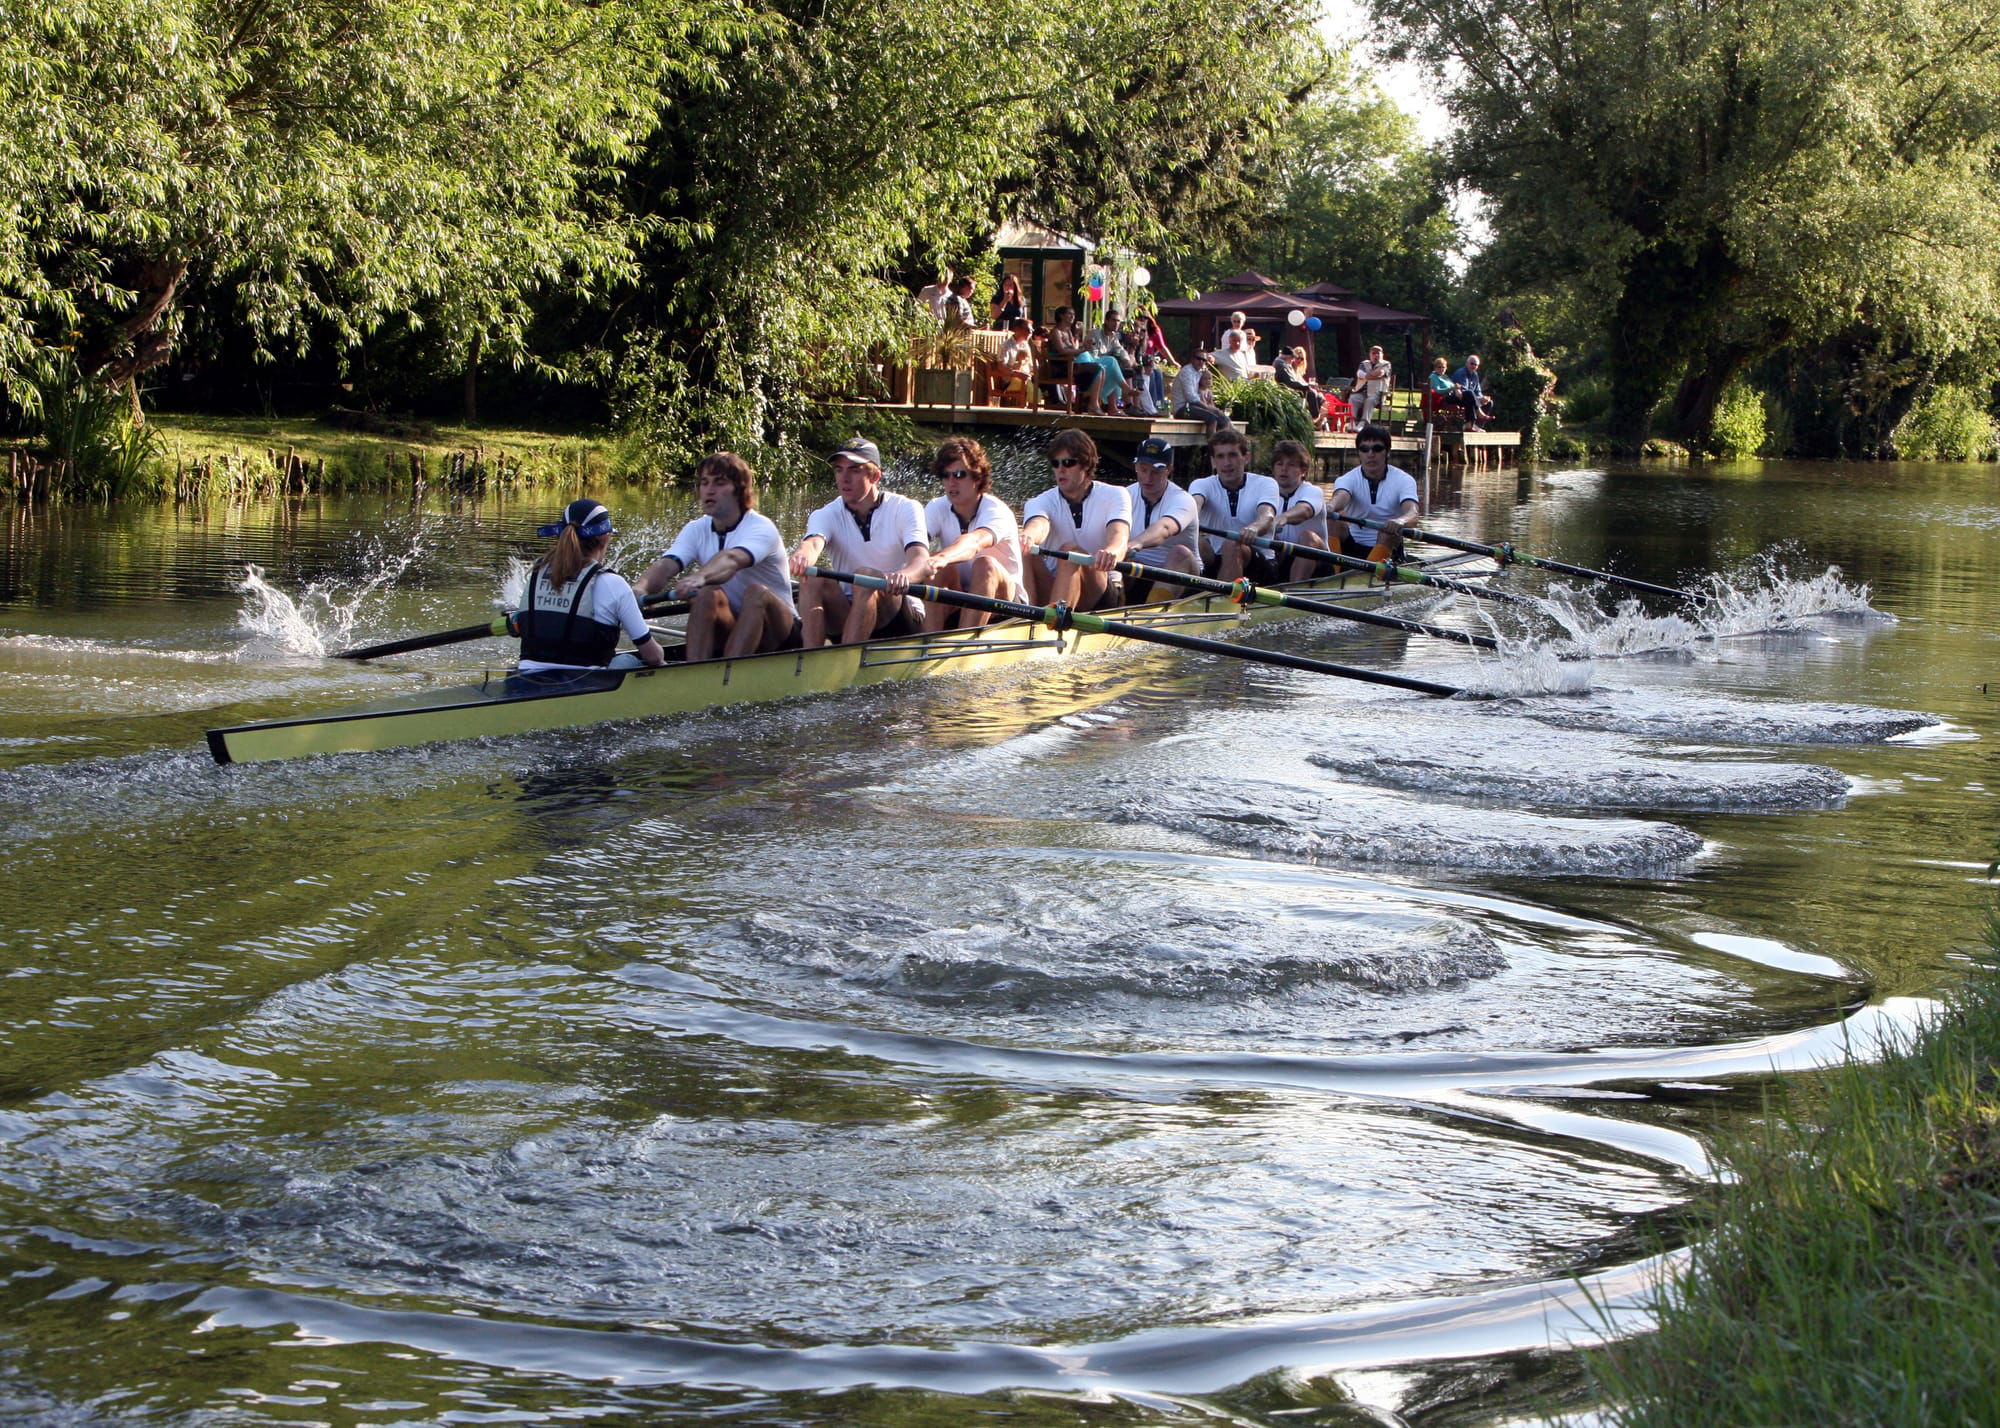 Men's 'Head of the River' - 1st & 3rd, 'May's 2010'